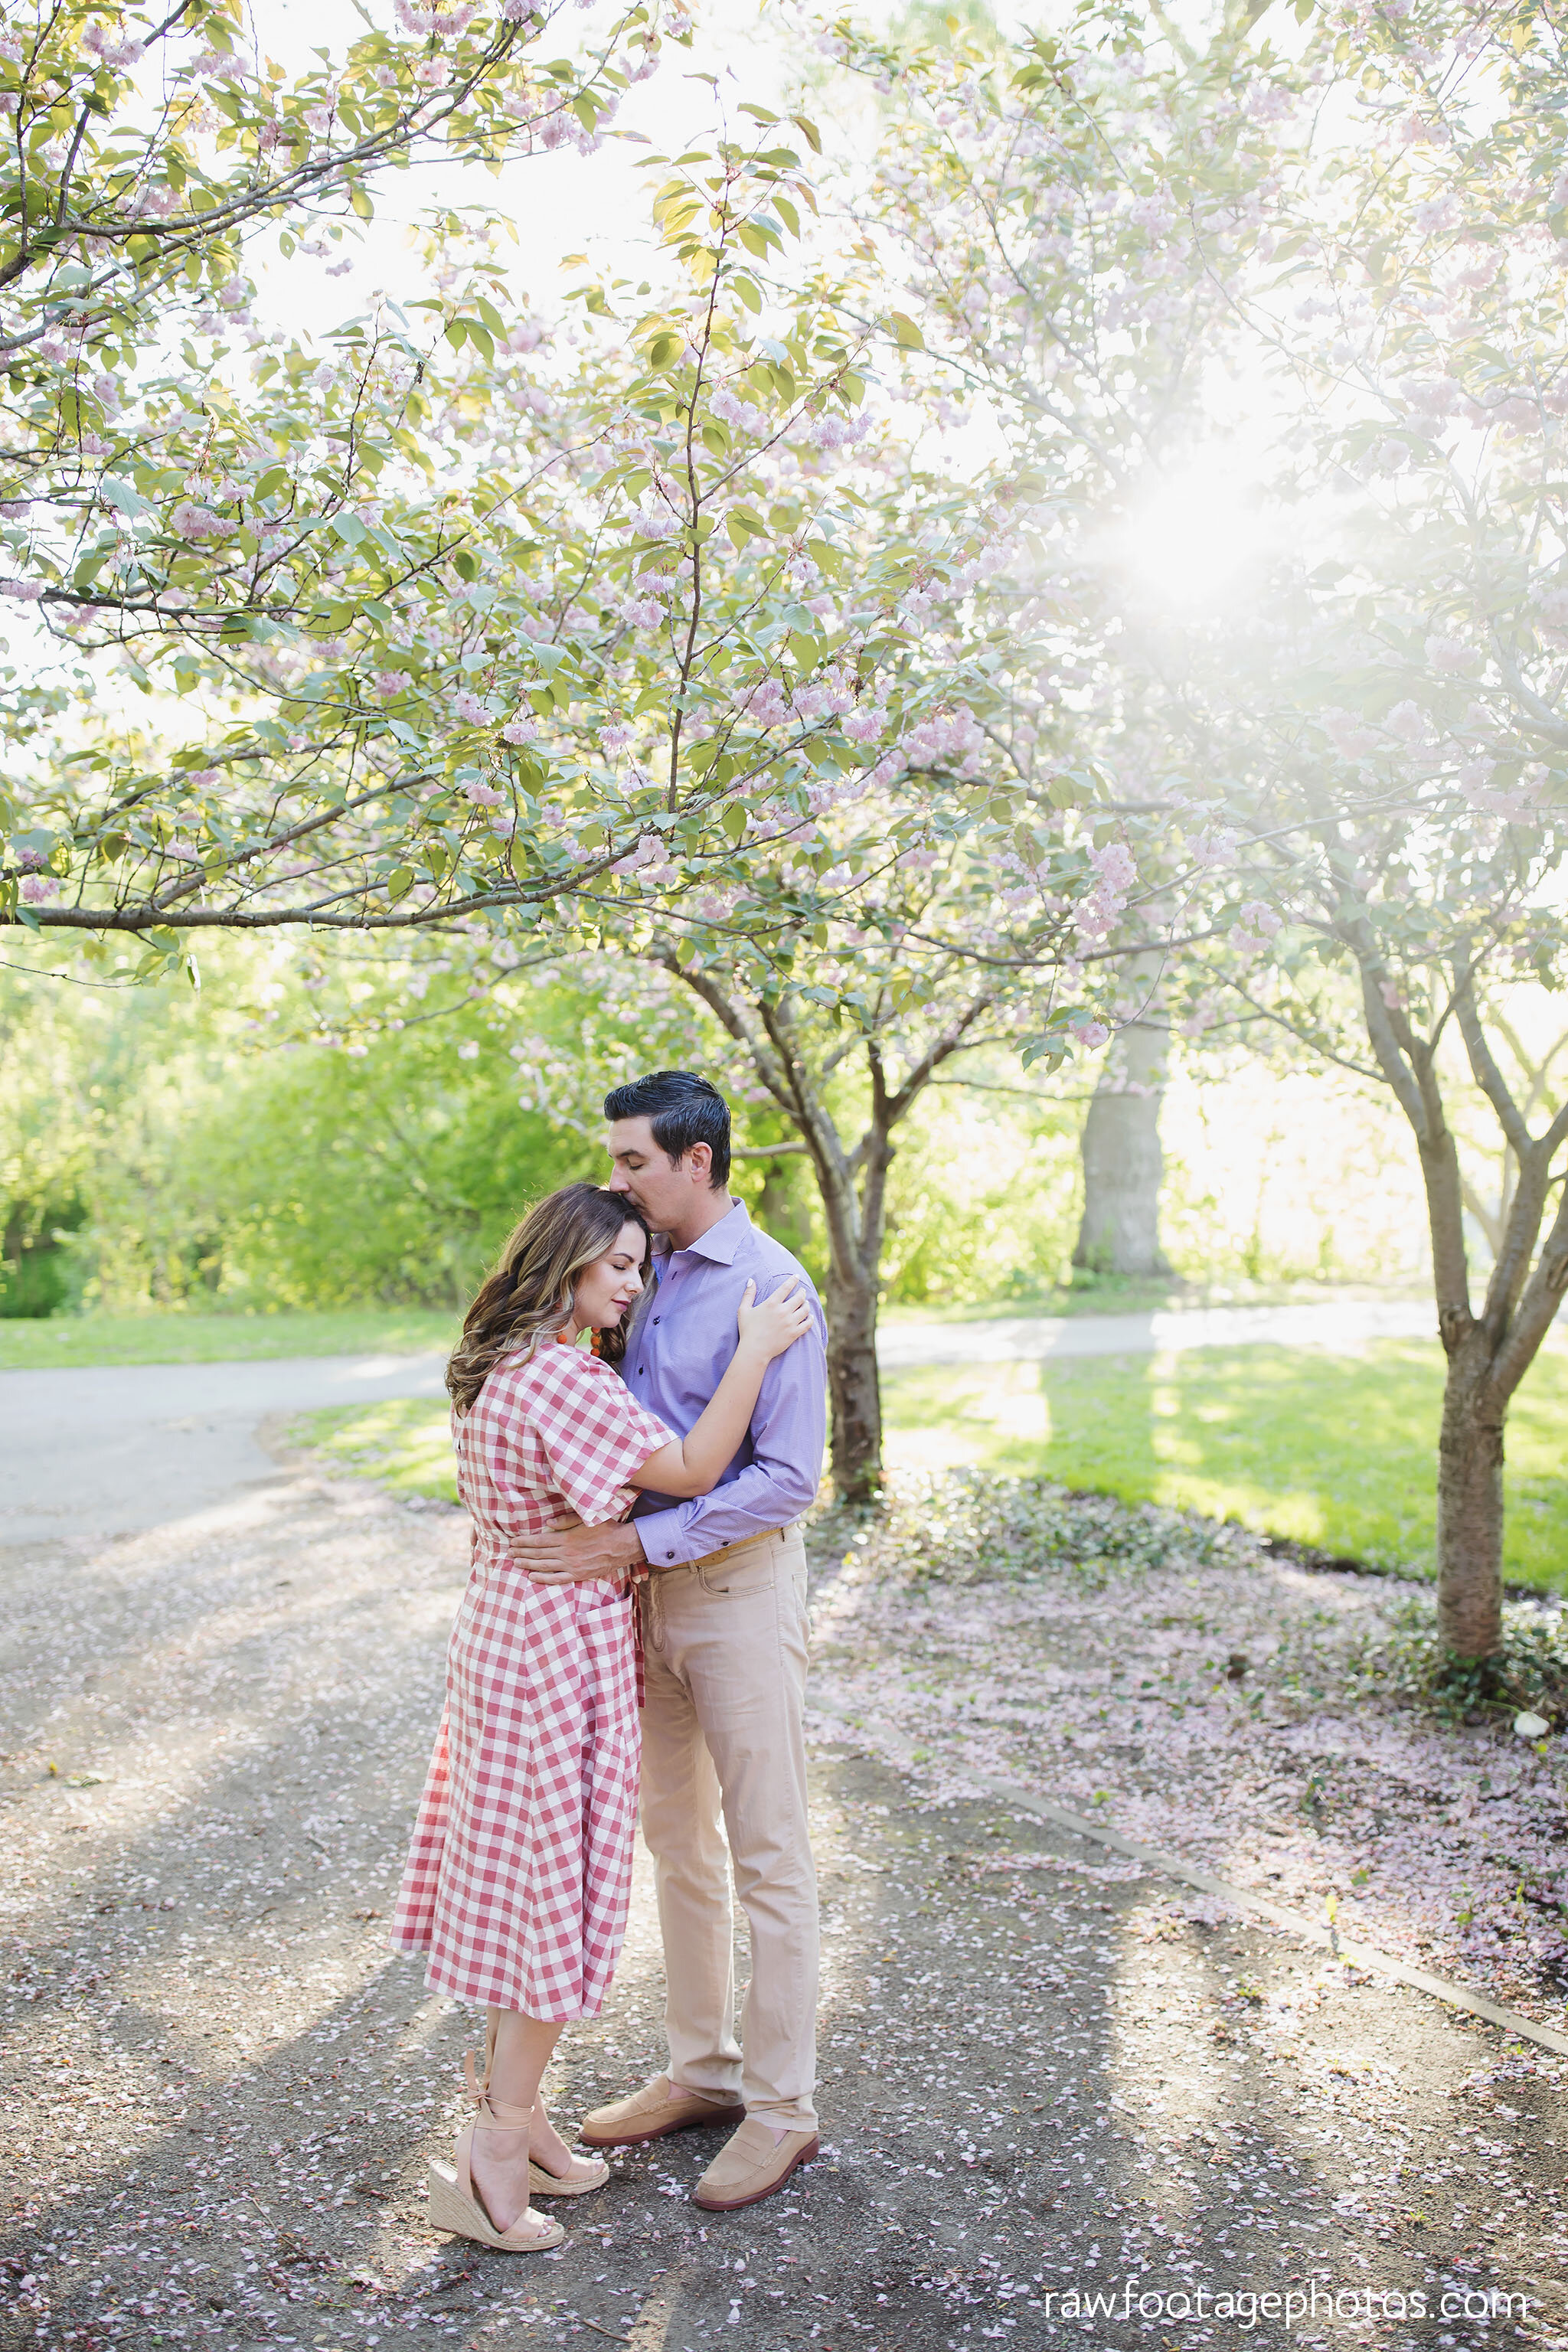 london_ontario_wedding_photographer-raw_footage_photography-spring_engagement_session-spring_blossoms-ivey_park_002.jpg